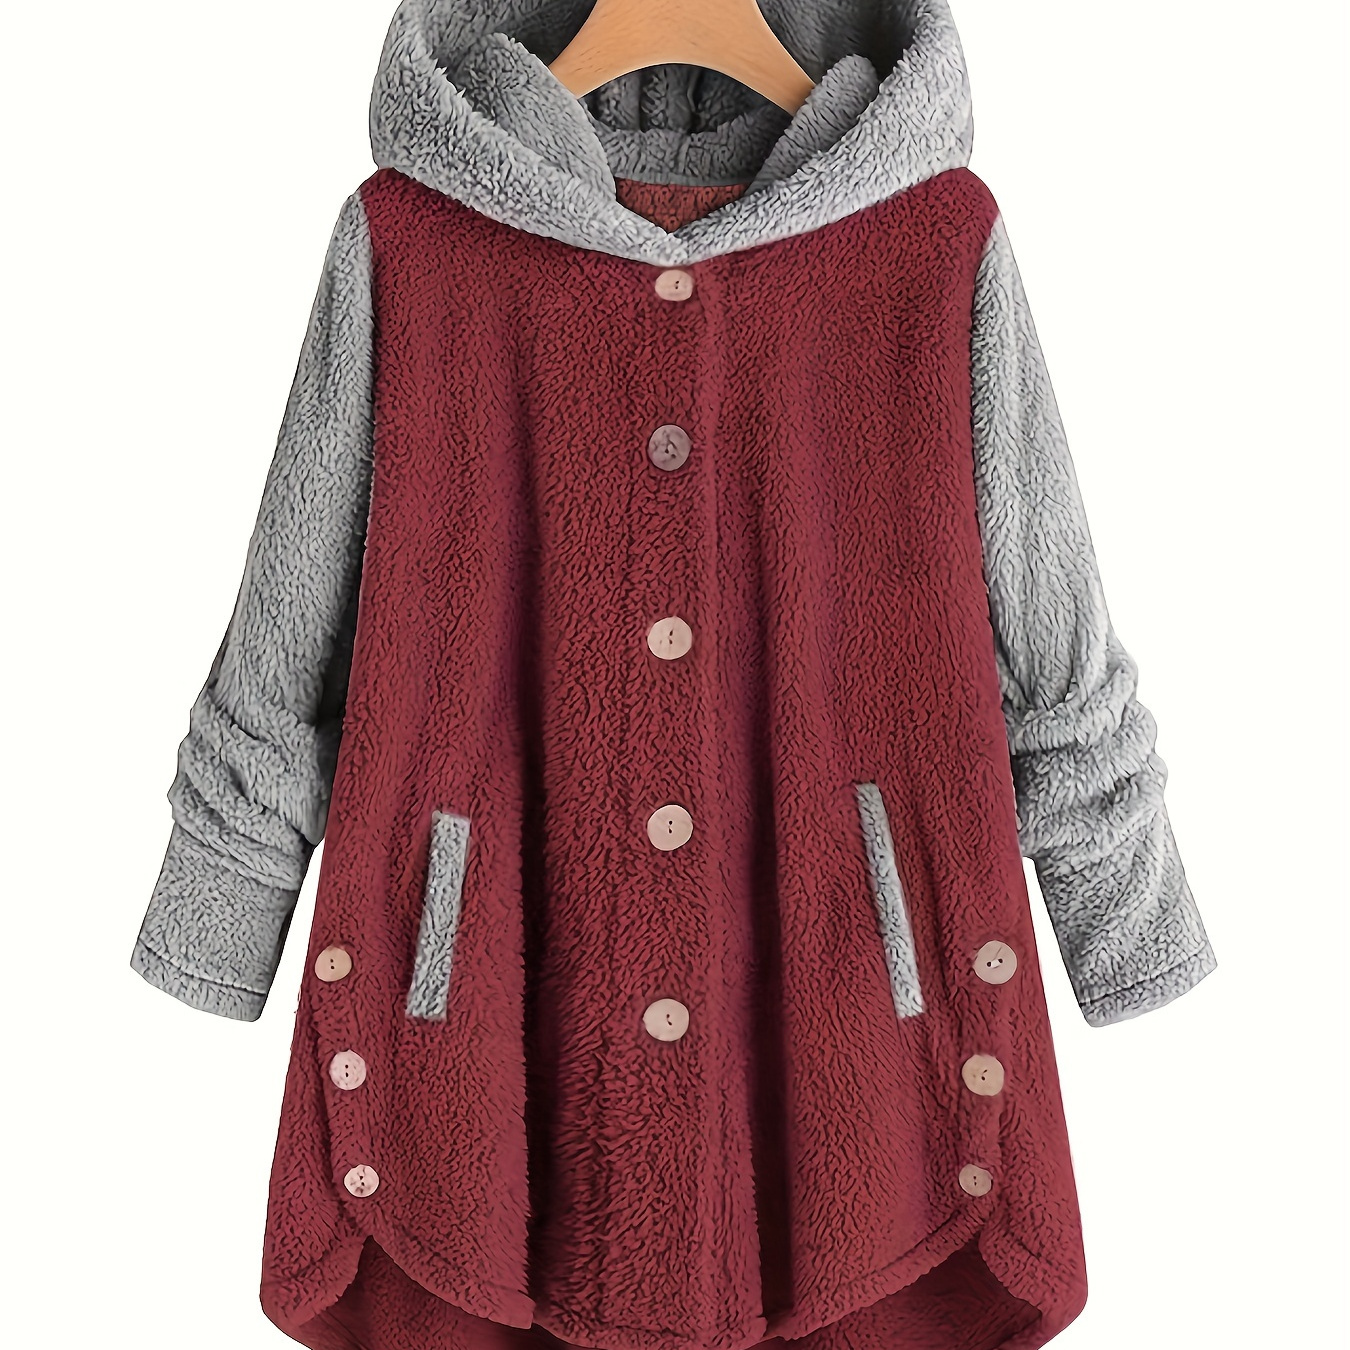 

Plus Size Casual Coat, Women's Plus Colorblock Long Sleeve Button Up Hooded Teddy Coat